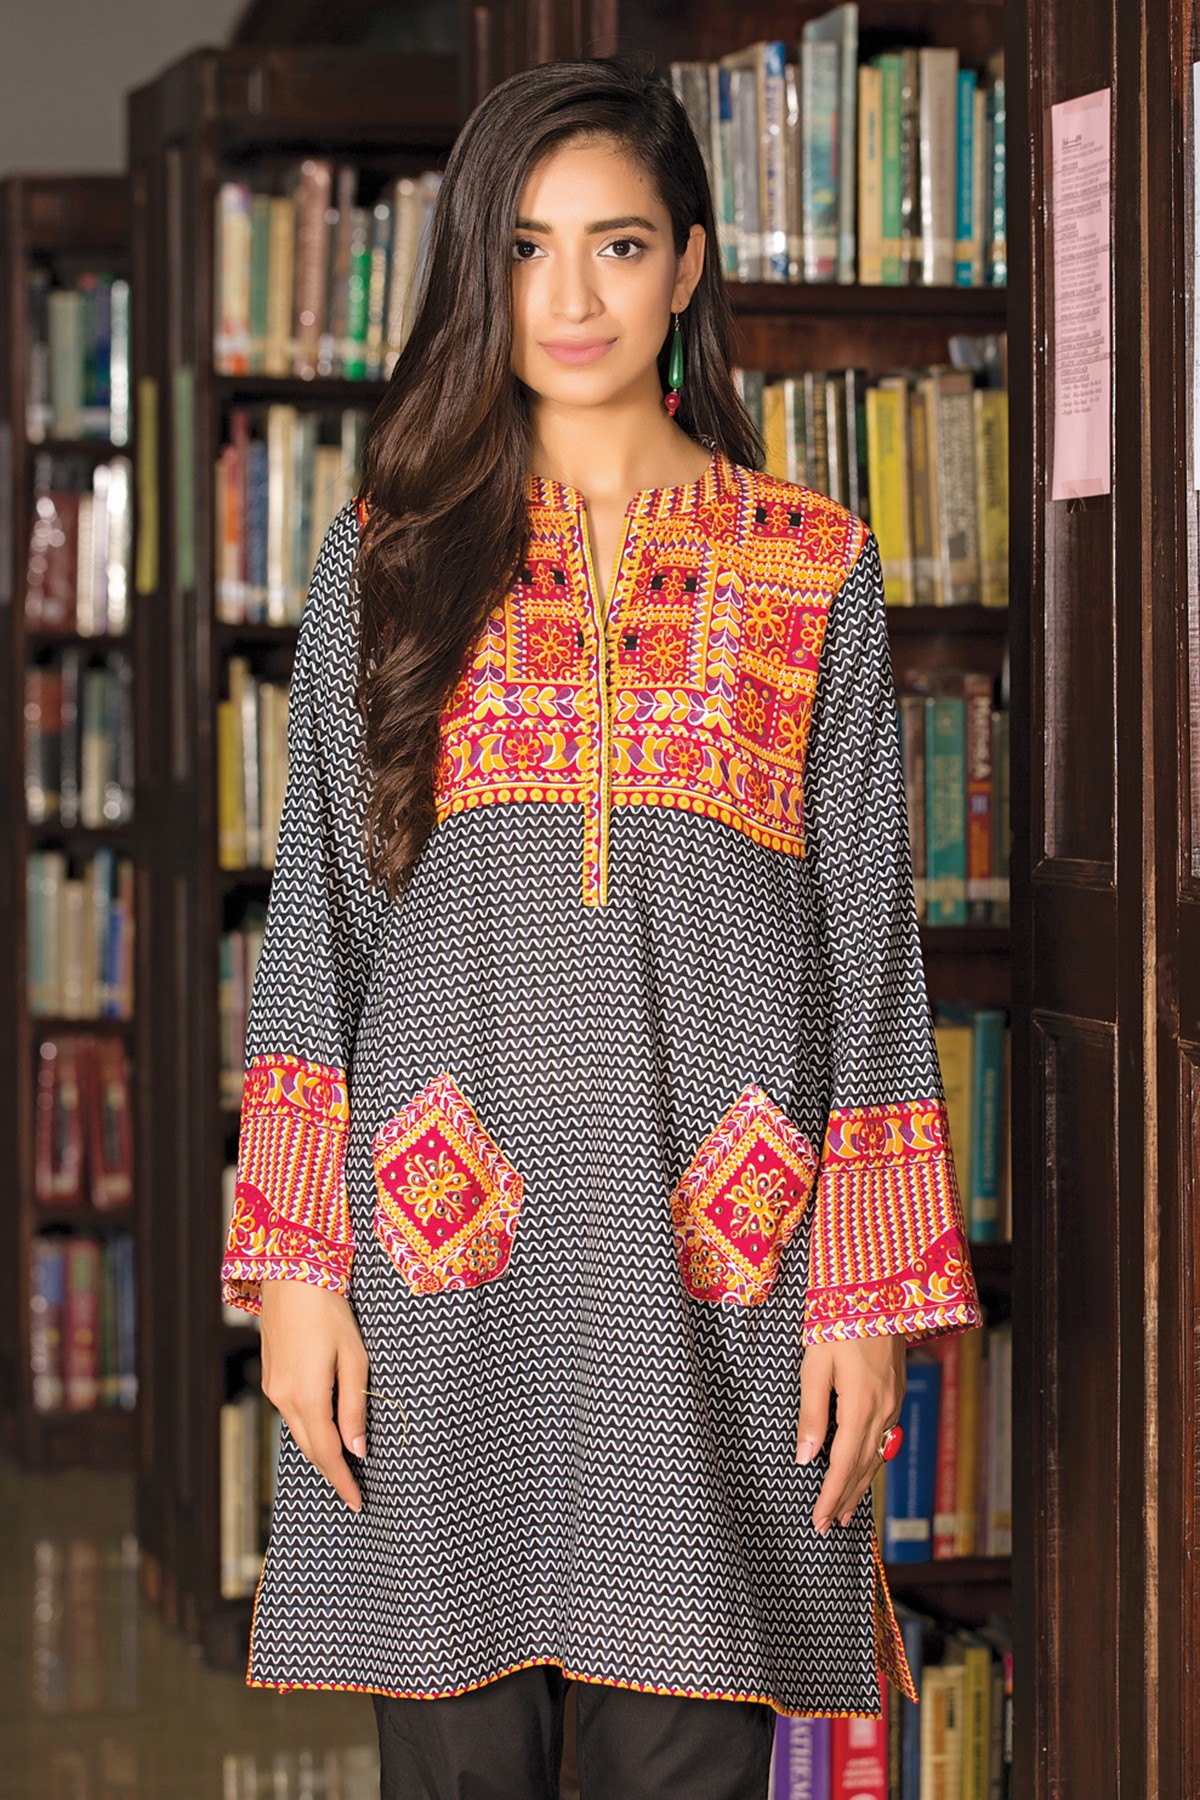 Top 15 Clothing Brands For Women in Pakistan - Dresses - Crayon